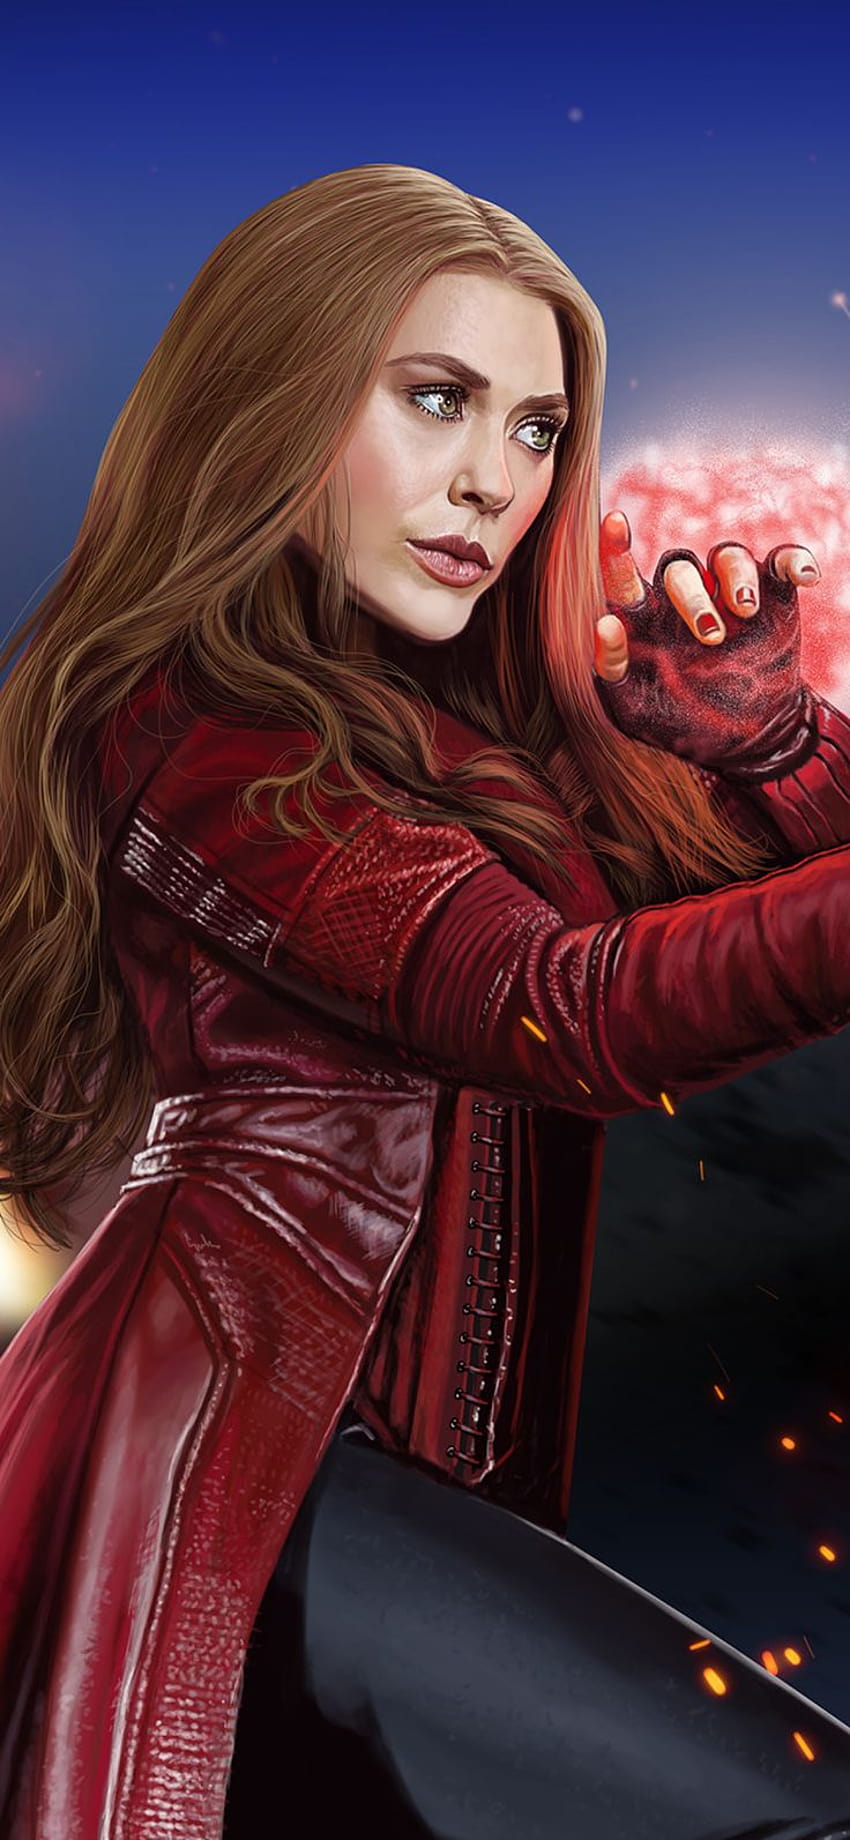 1125x2436 Scarlet Witch New Artwork Iphone XS,Iphone 10,Iphone X , Backgrounds, and Pictur…, แม่มดแดง วอลล์เปเปอร์โทรศัพท์ HD